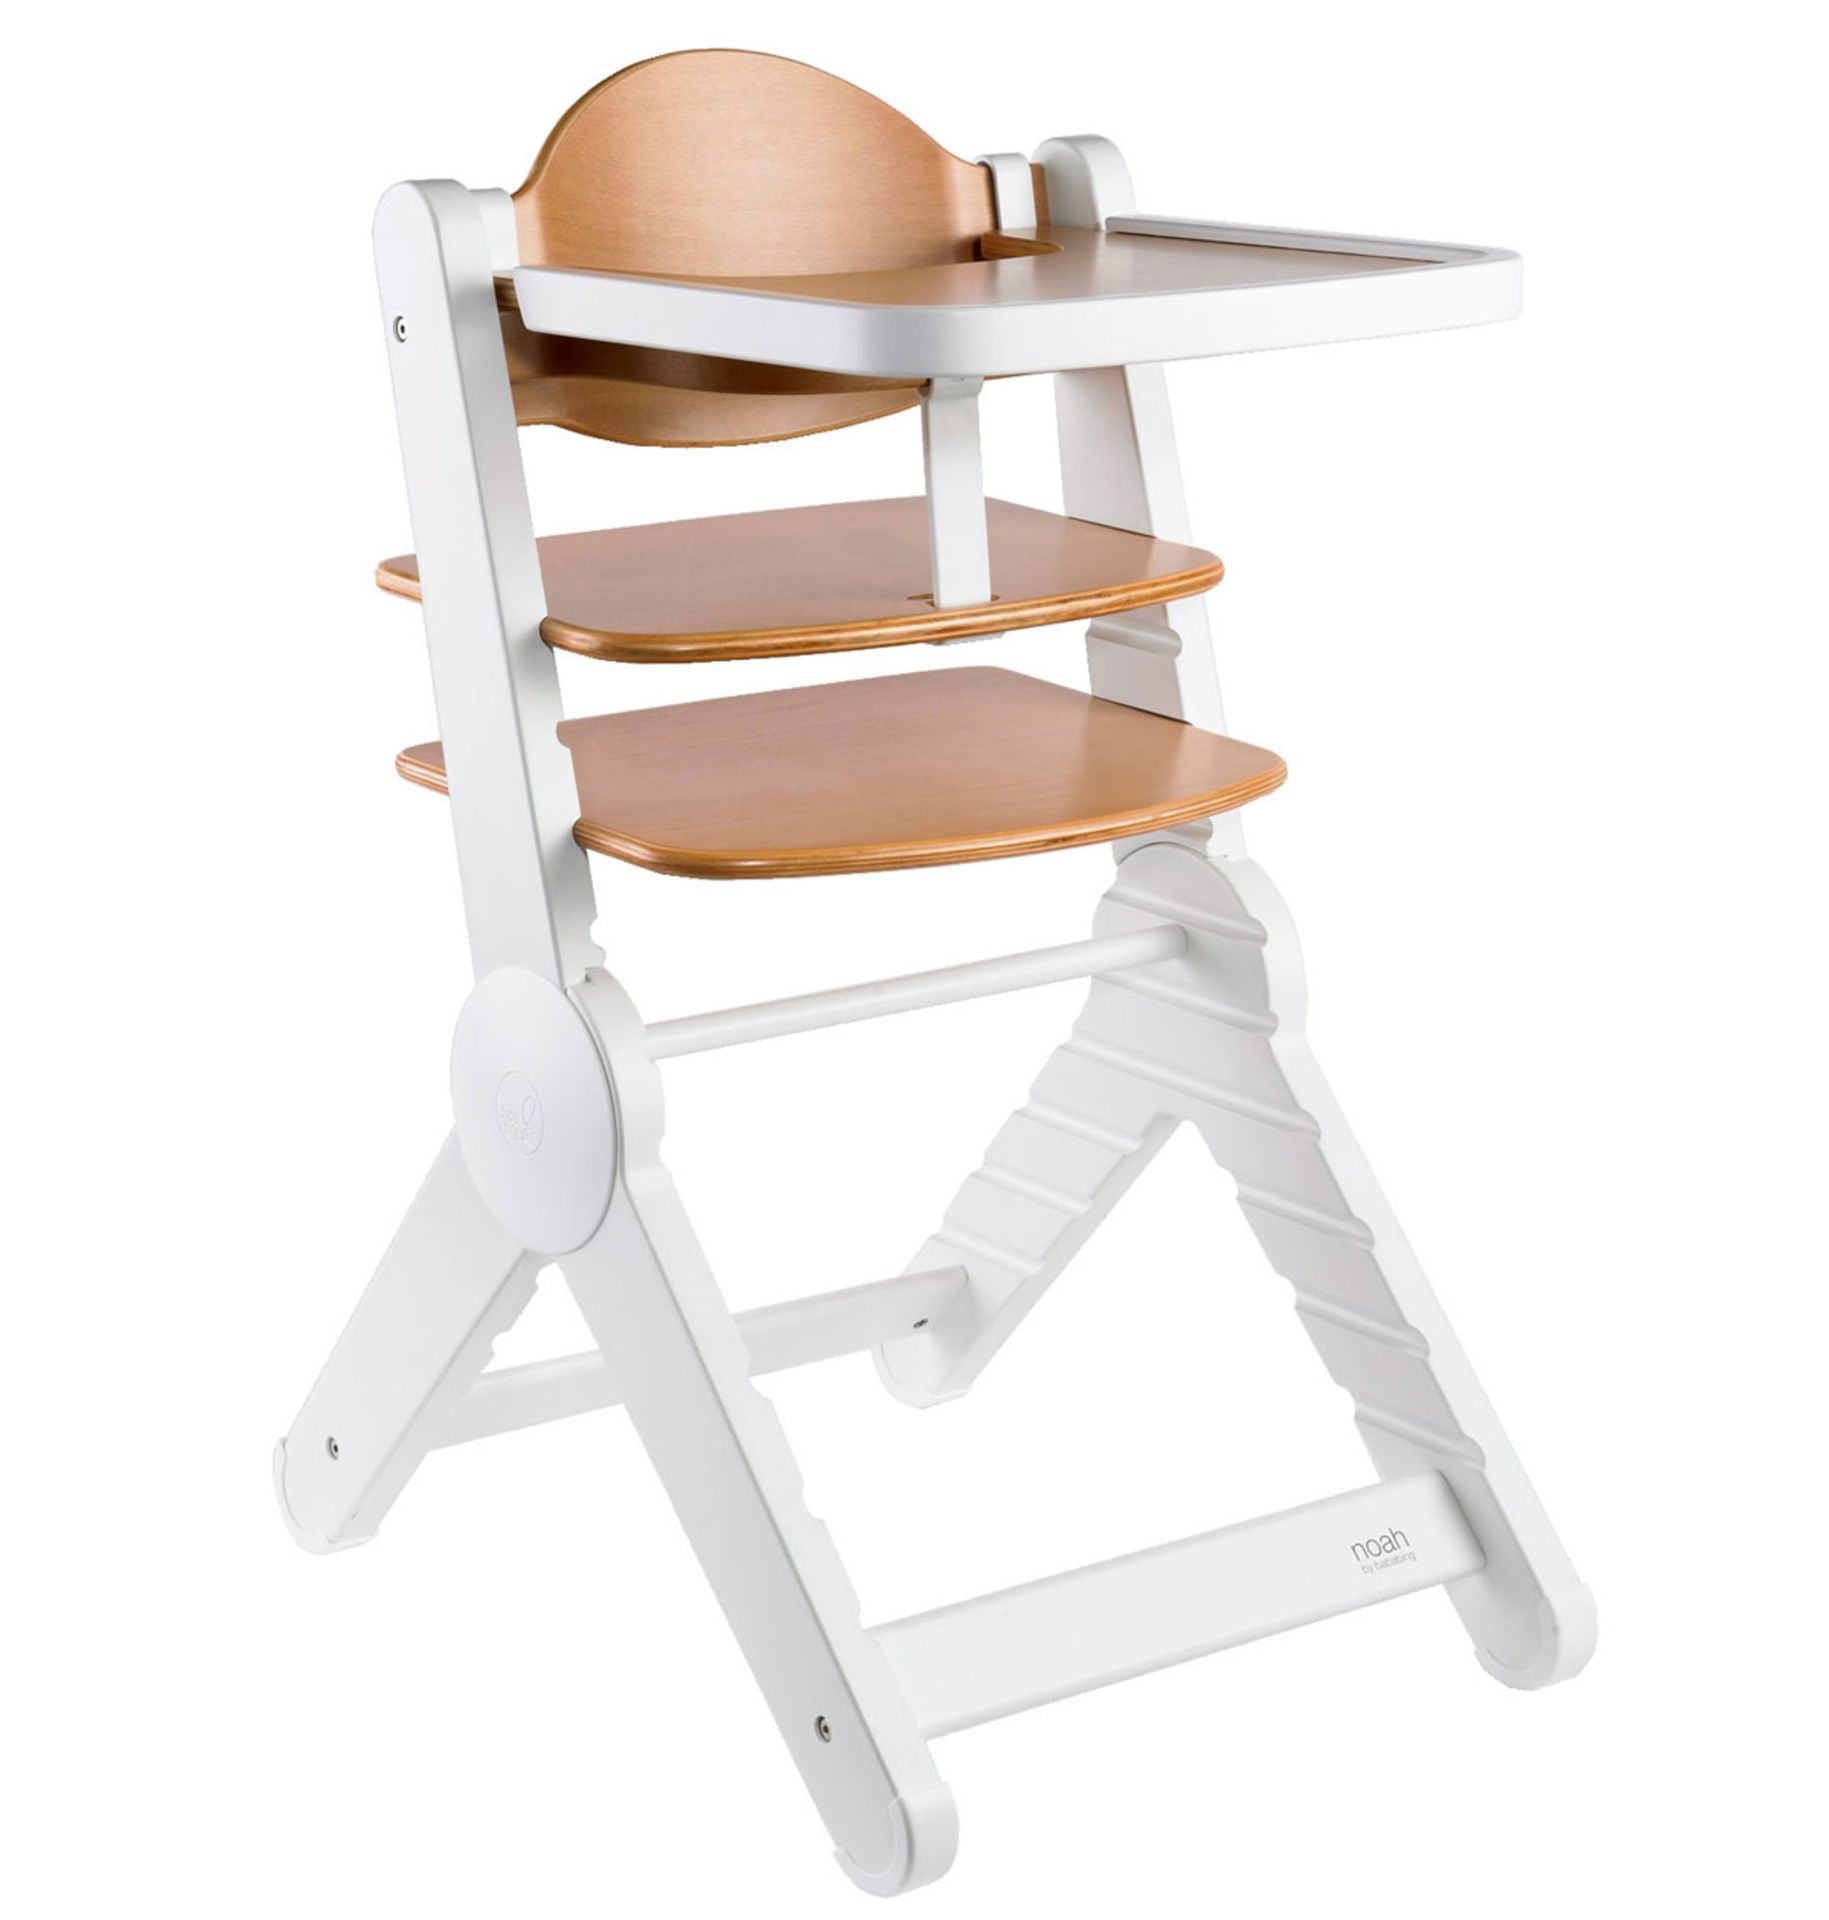 1 x BABA BING HIGH CHAIR (07/06/17) *PLEASE NOTE THAT THE BID PRICE IS MULTIPLIED BY THE NUMBER OF